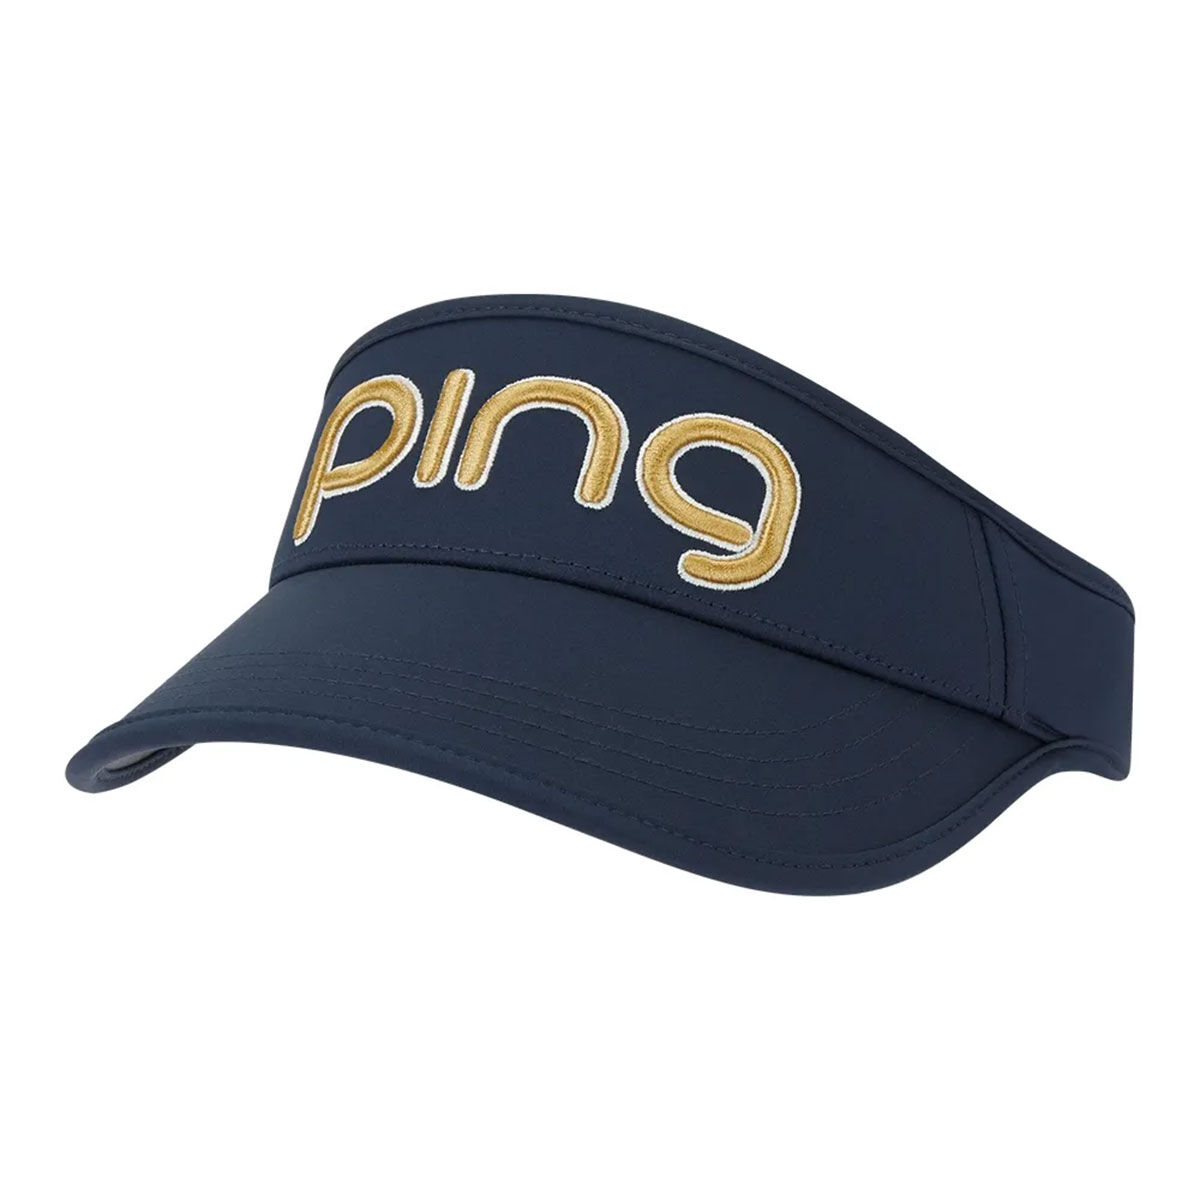 PING Men’s Blue, White and Black Embroidered G Le3 Tour Delta Golf Visor | American Golf, One Size